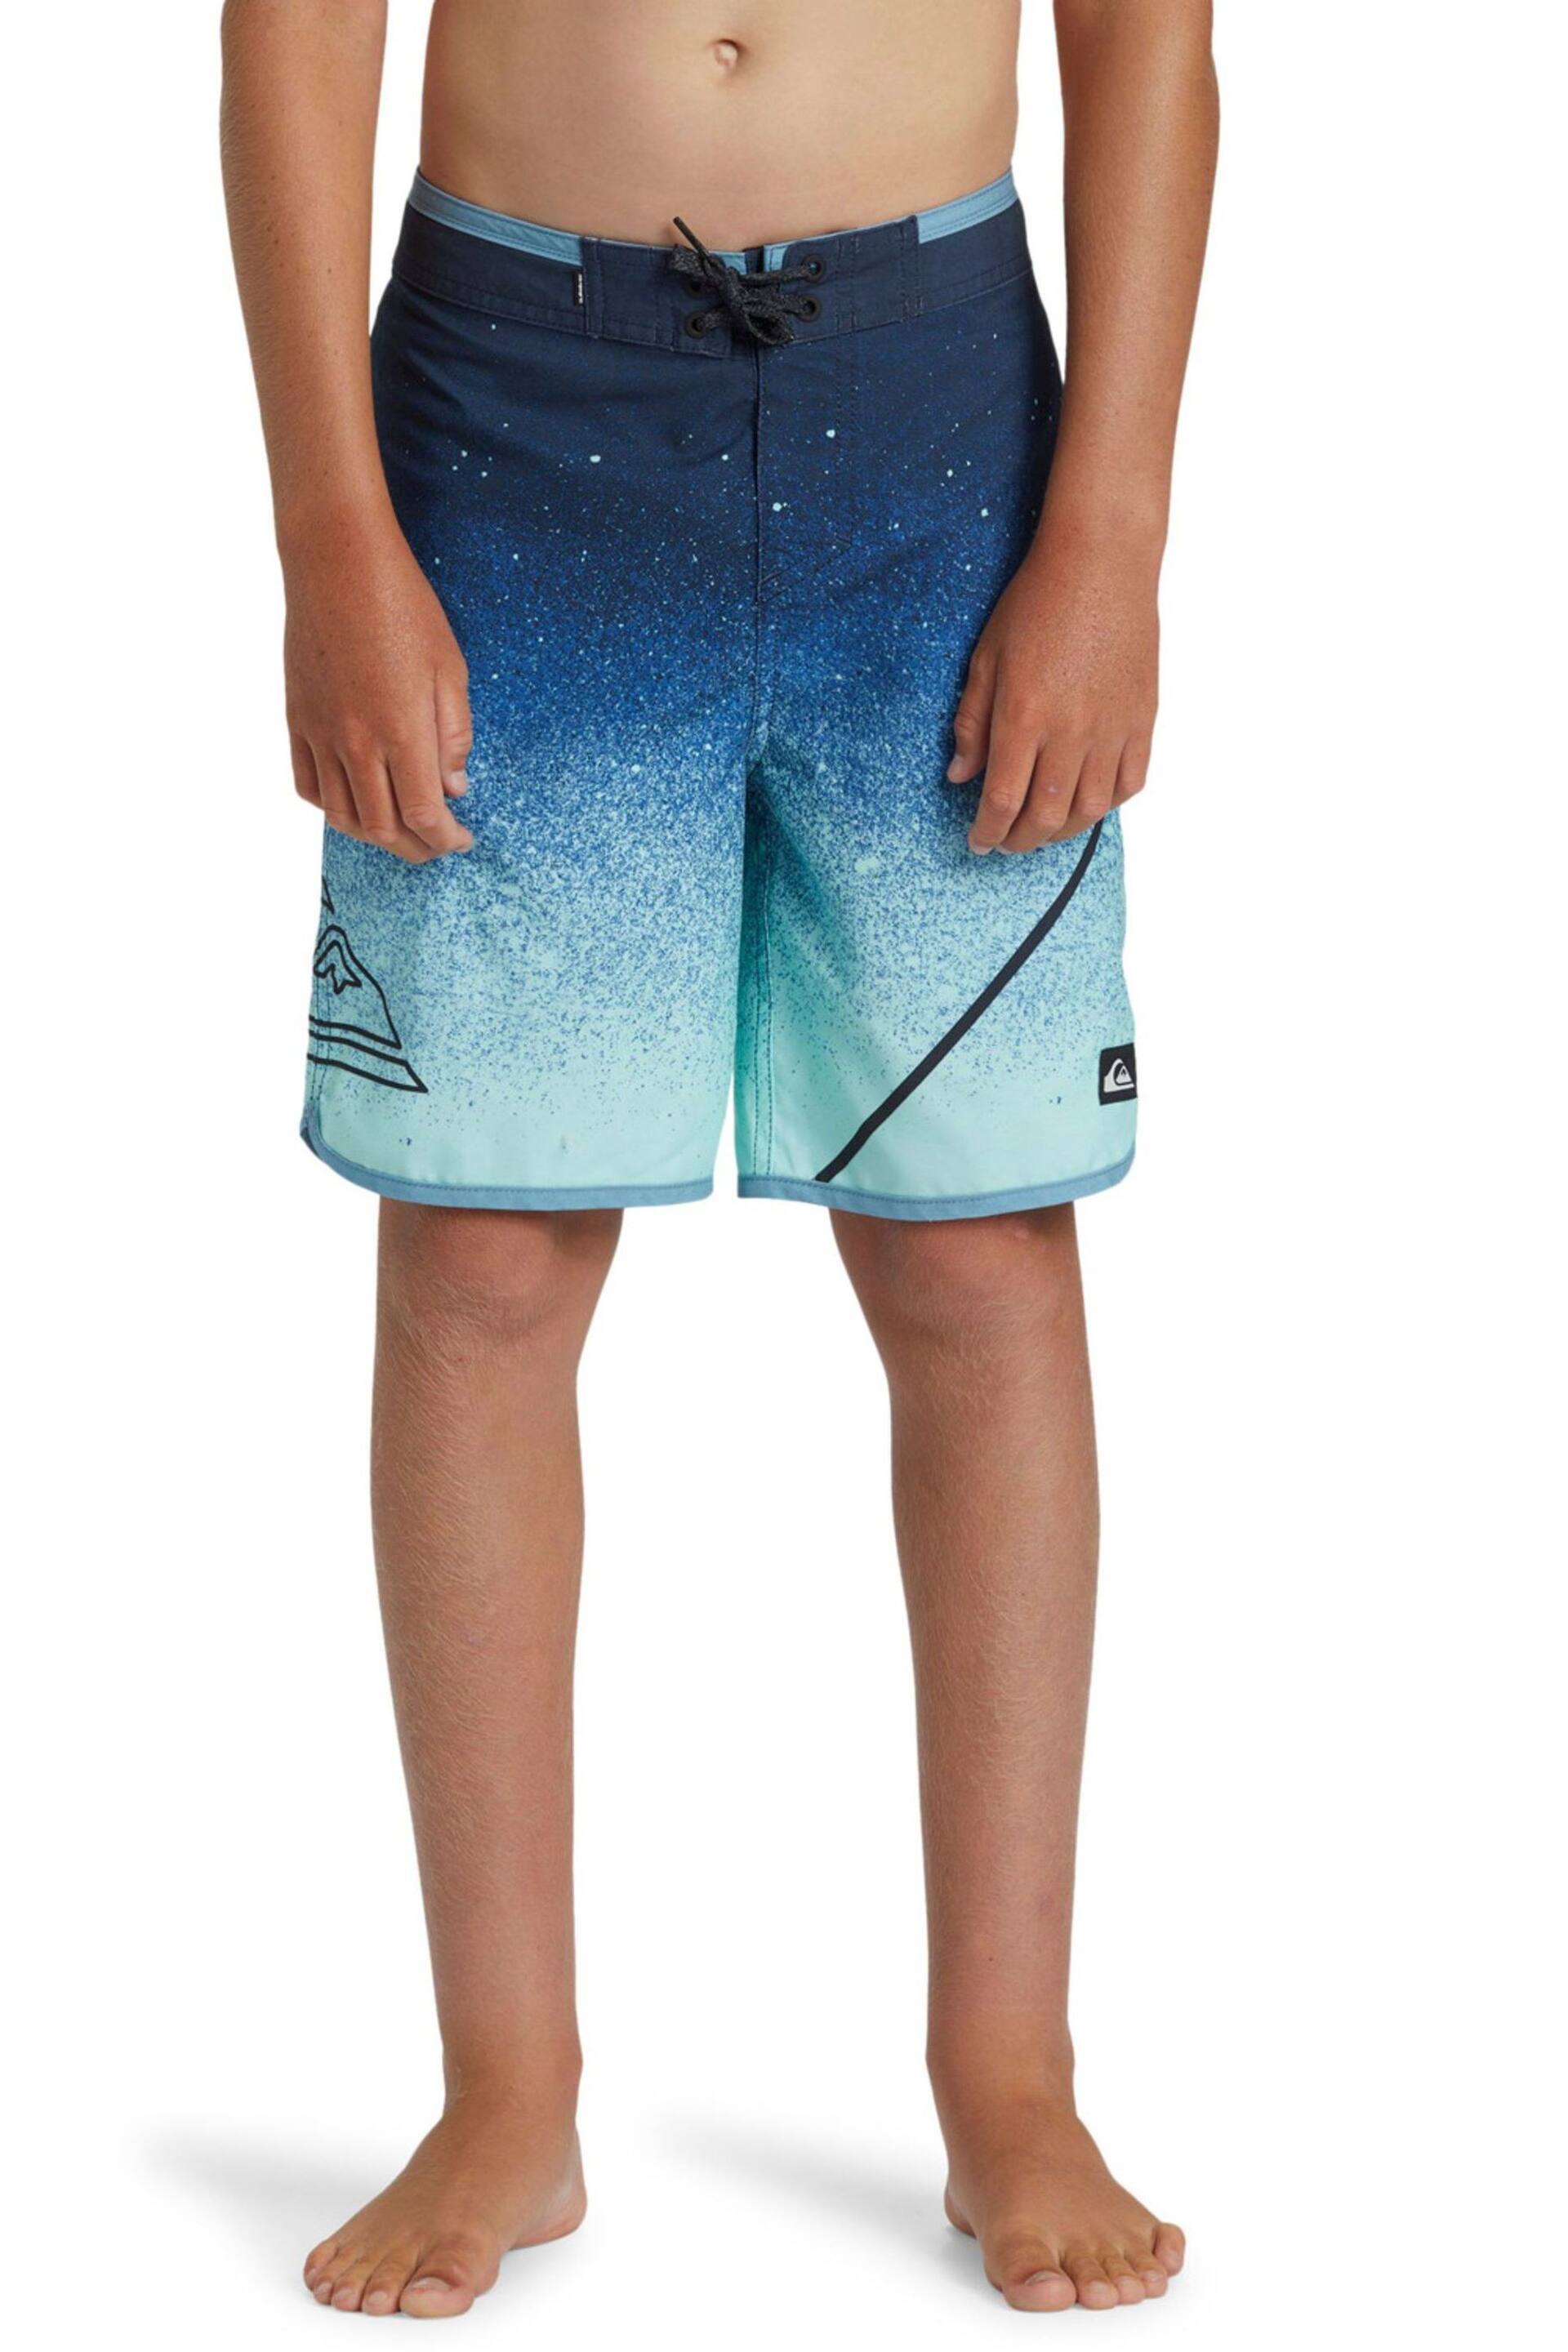 Quiksilver Boys Blue Youth Ombre Surfsilk Swim Shorts - Image 1 of 7